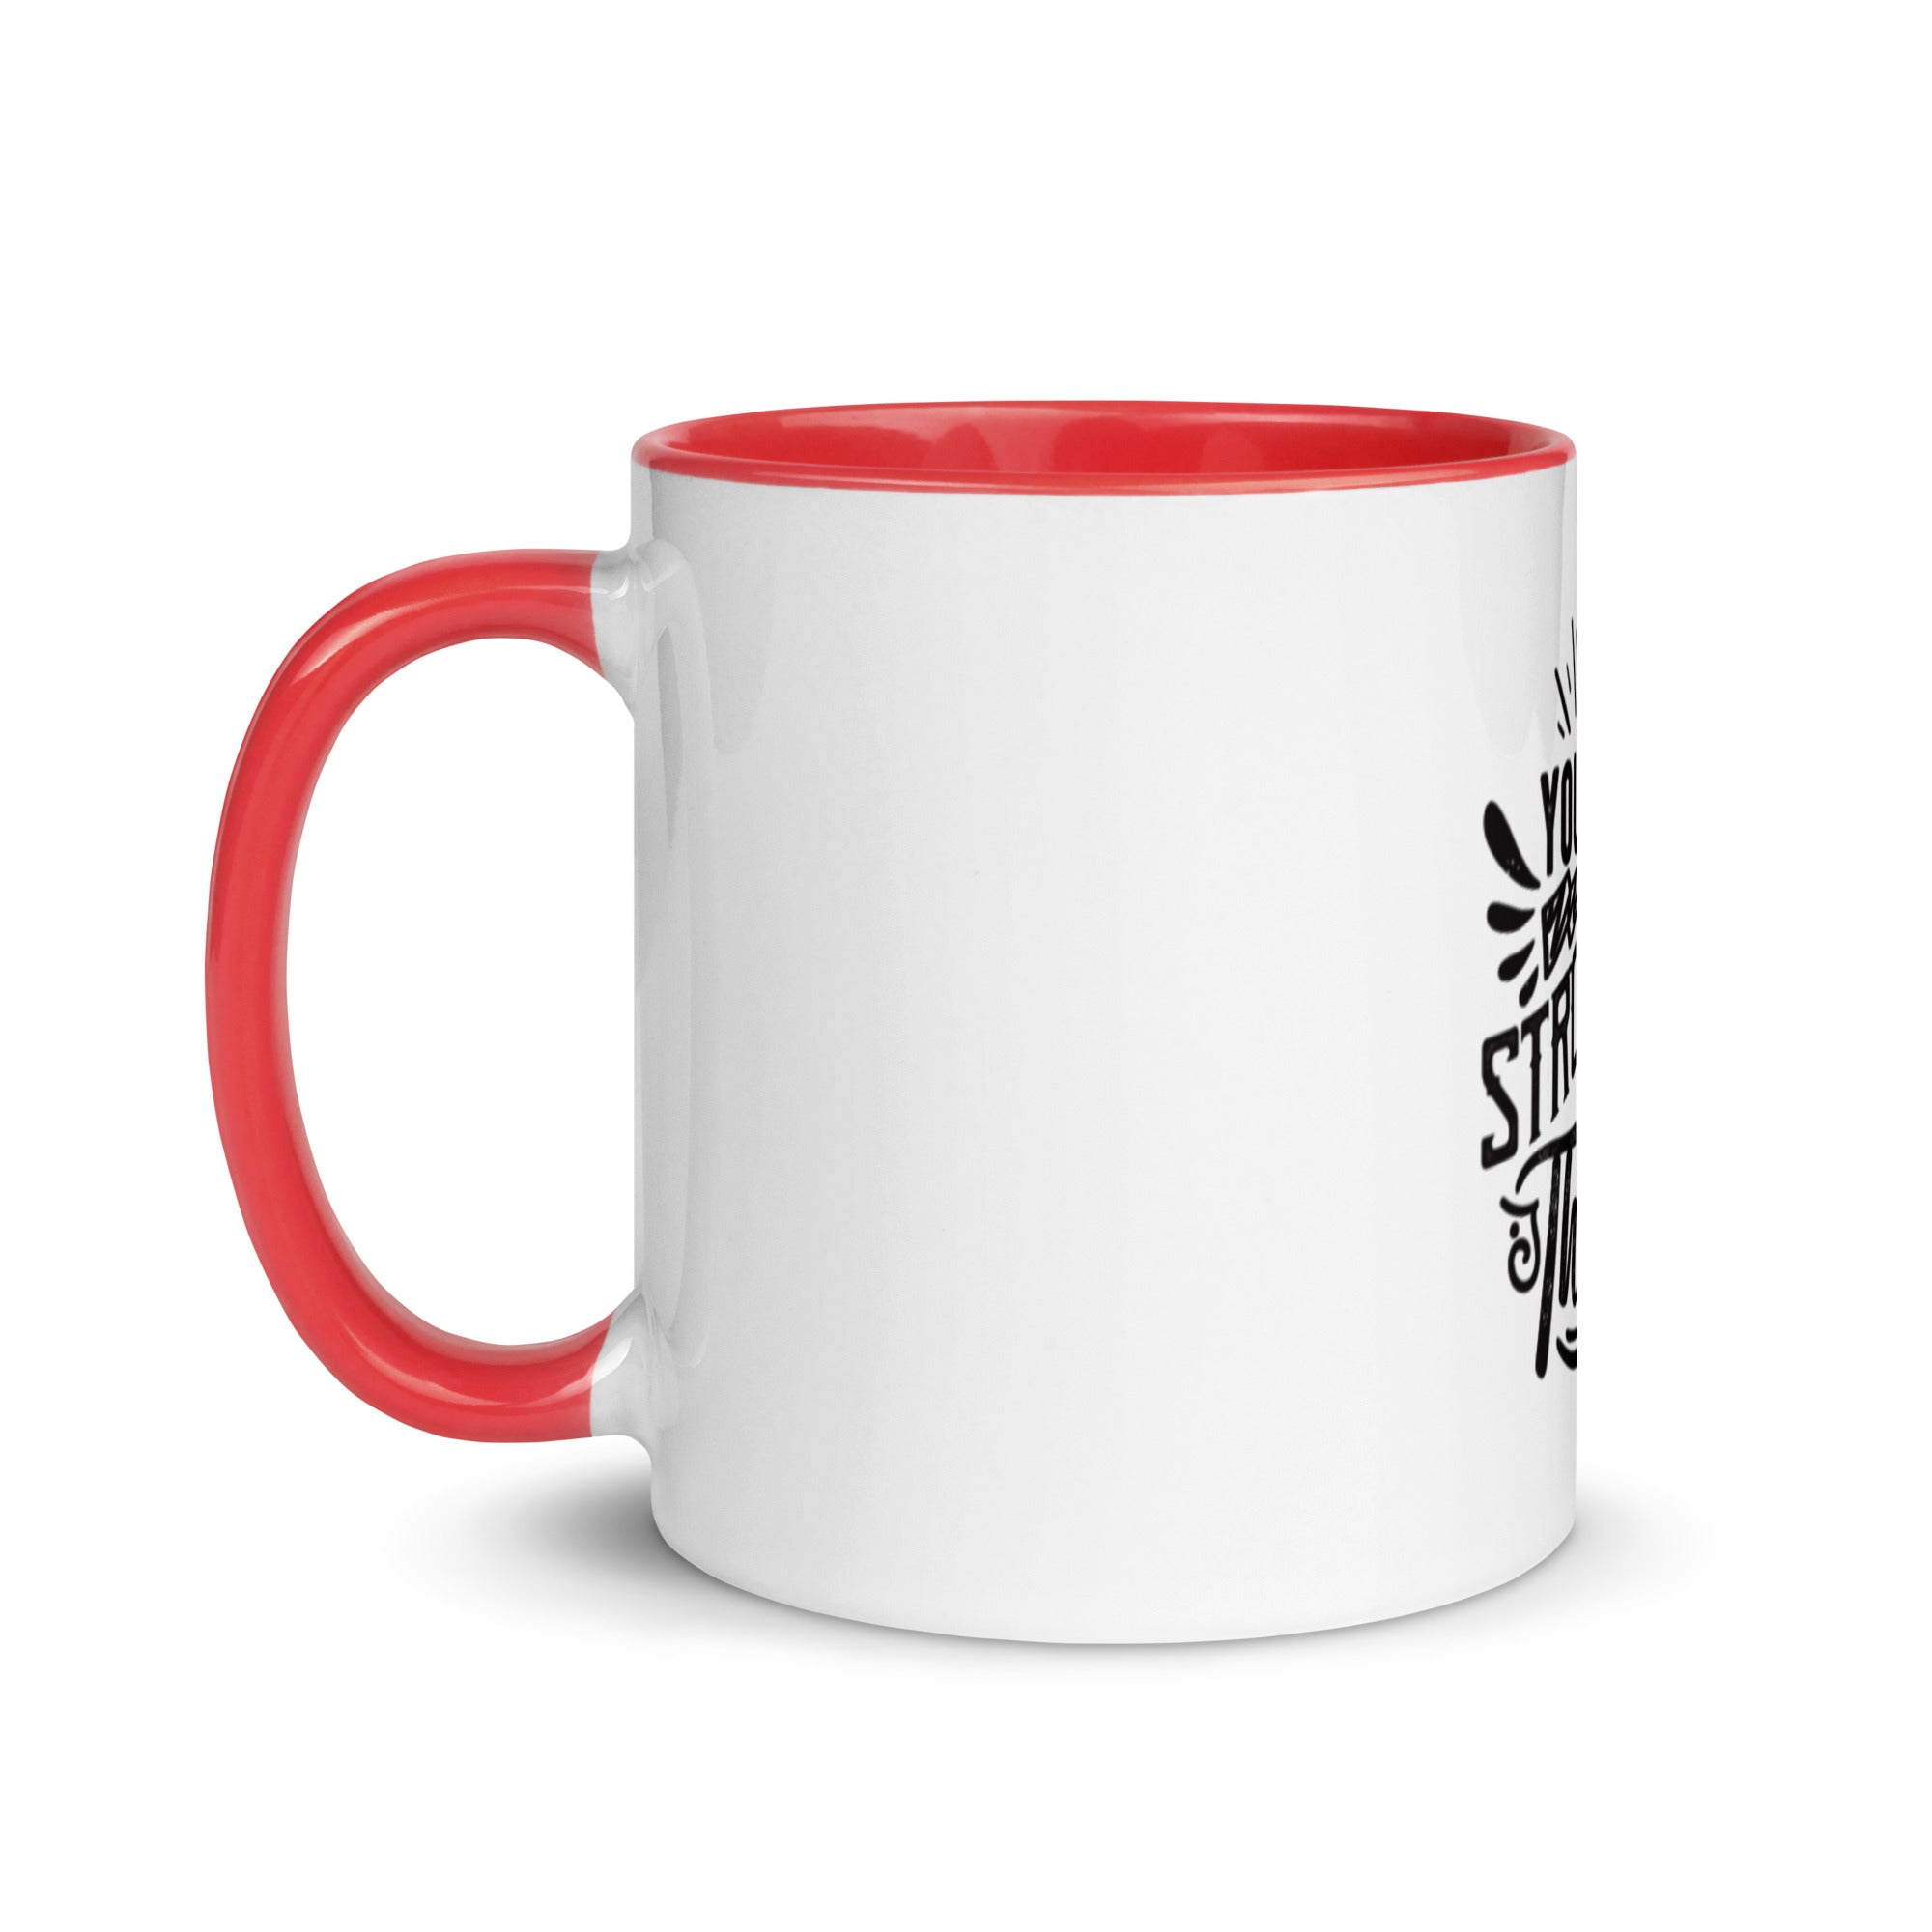 You Are Stronger Than You Think - Mug with Color Inside